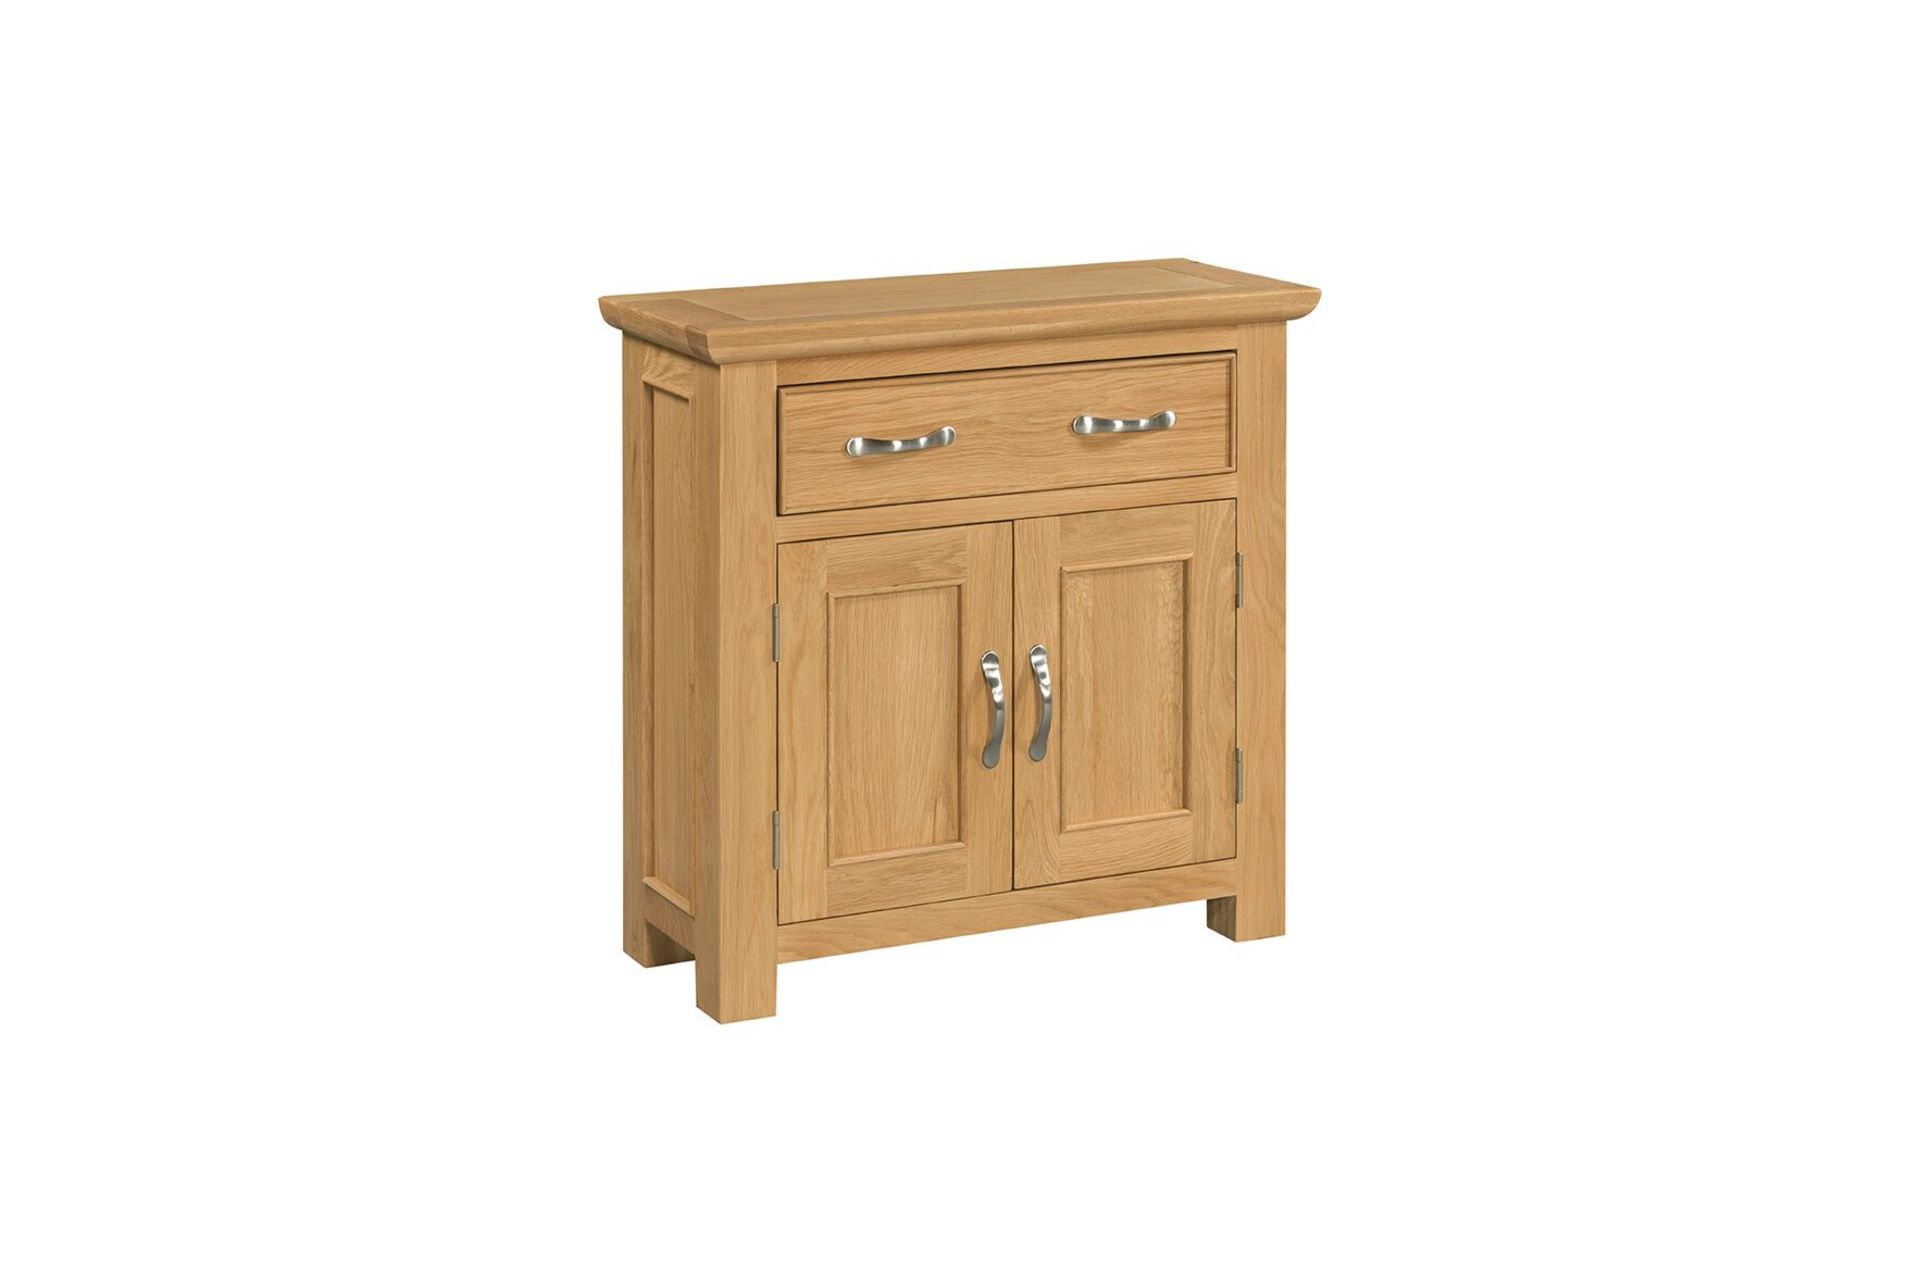 V Brand New Siena Compact sideboard with 1 drawer & 2 doors 80x32x80 cms RRP289.00 (